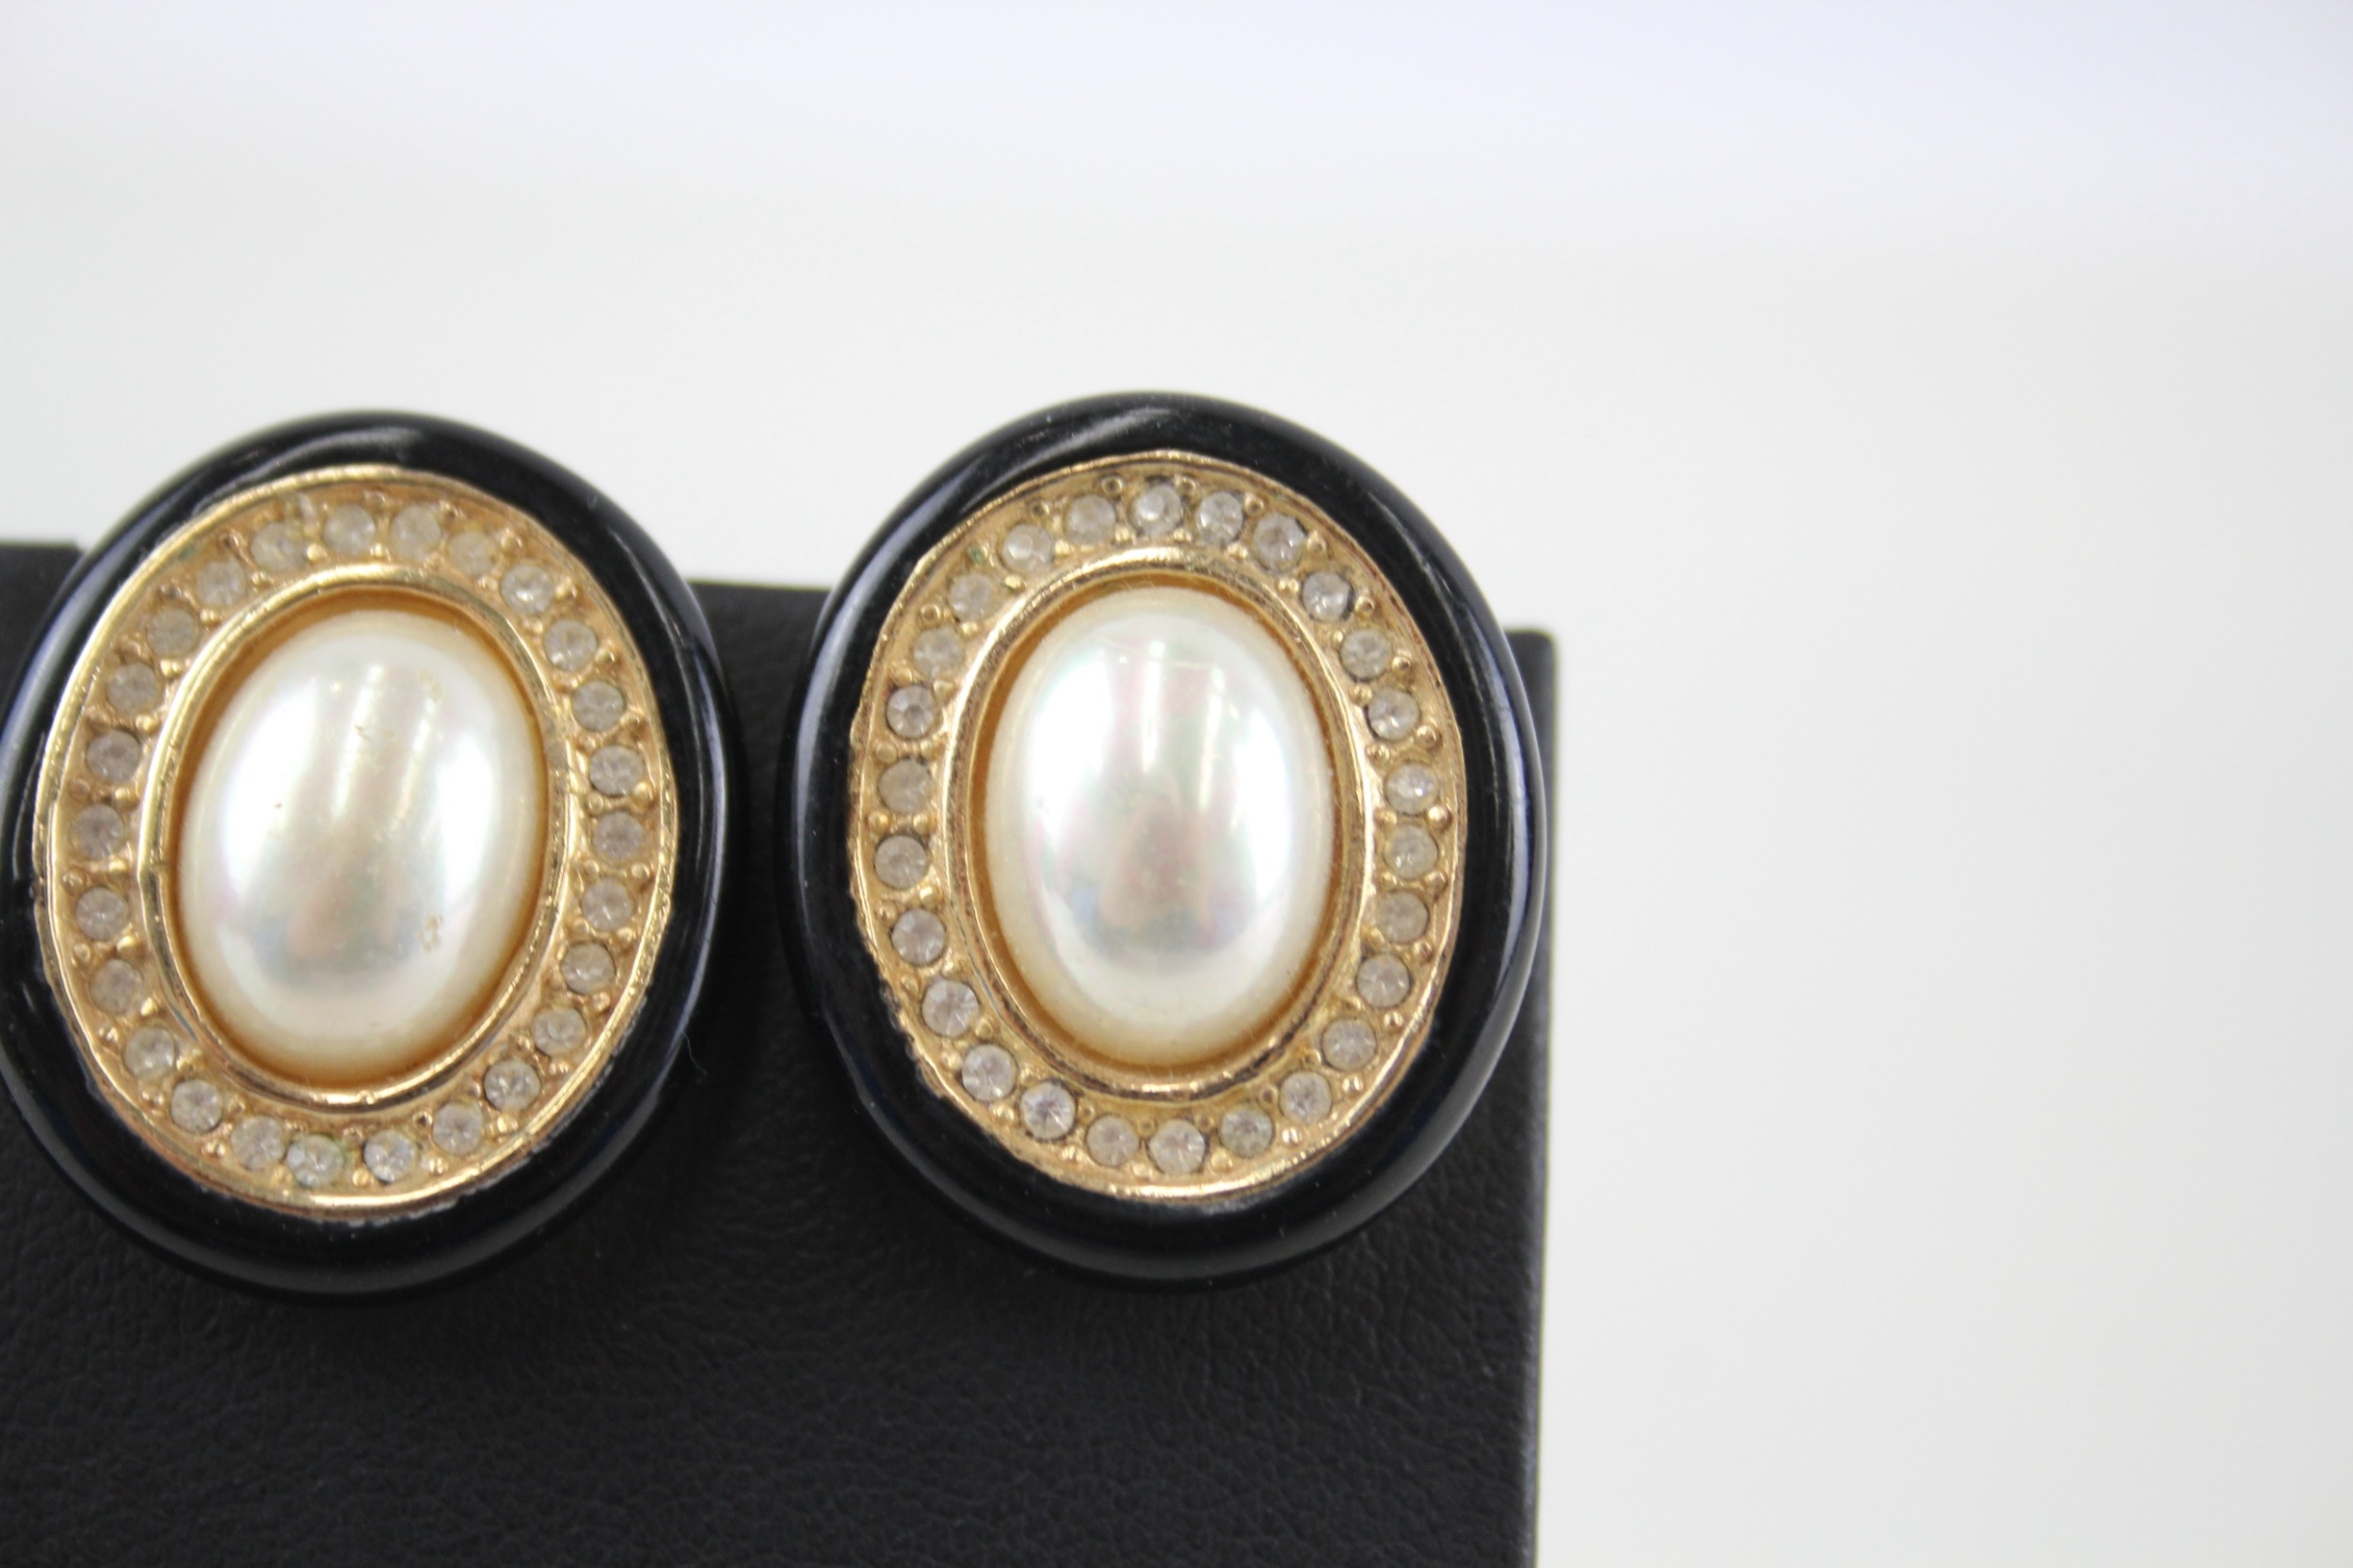 Pair of gold tone simulated pearl clip on earrings by designer Christian Dior (21g) - Image 3 of 5